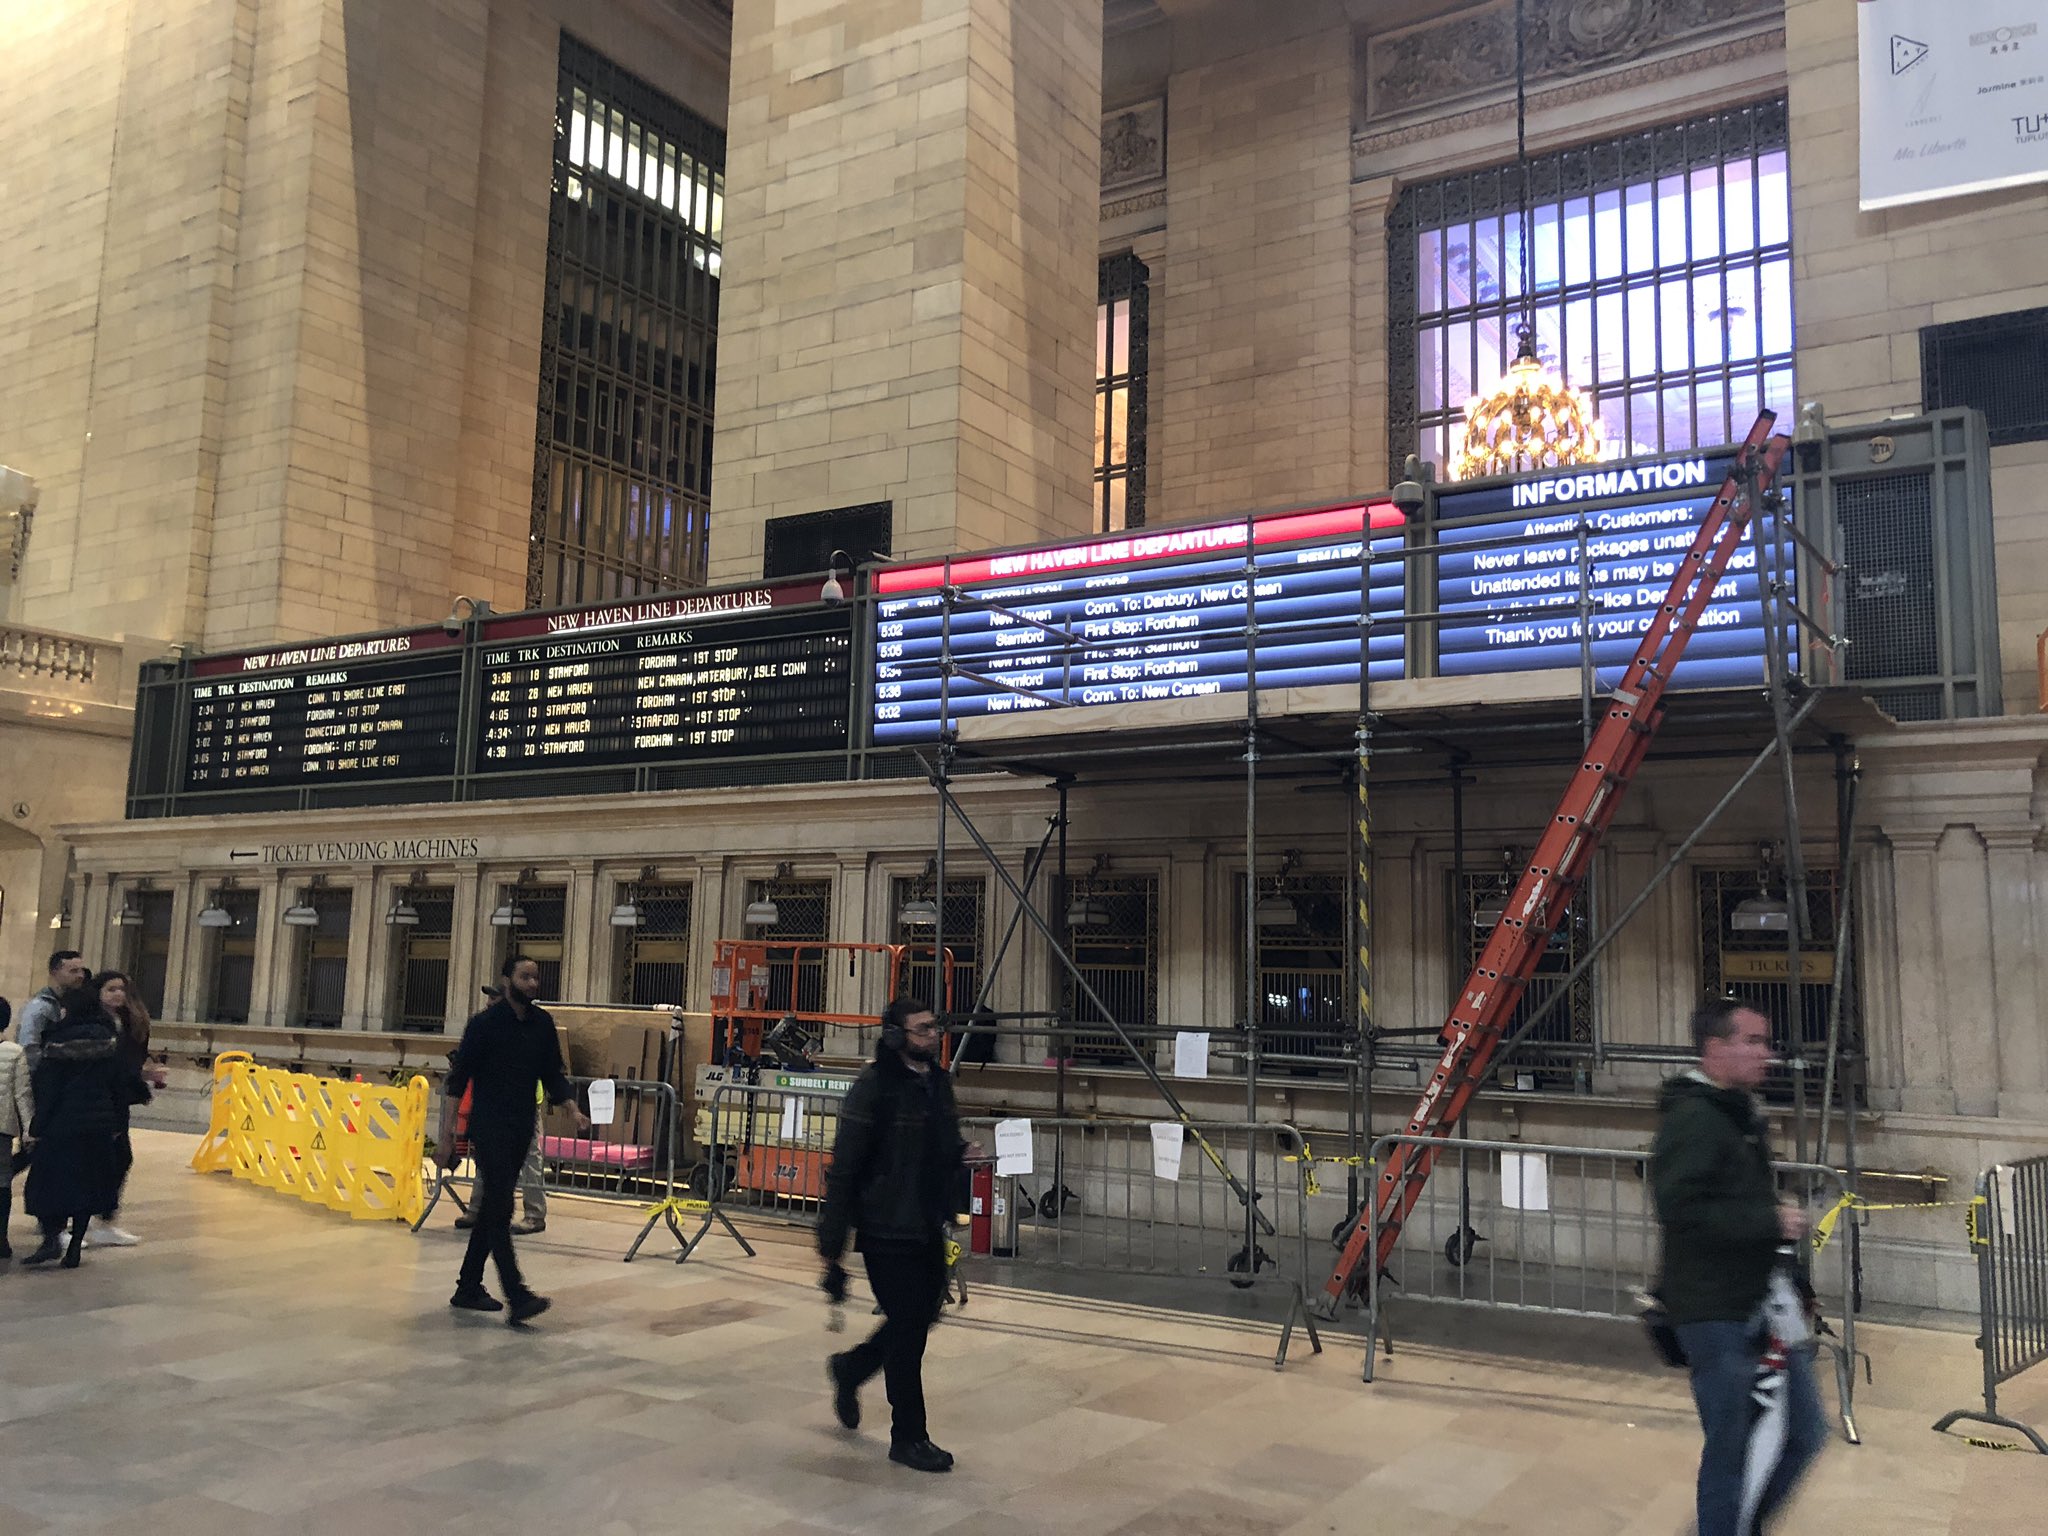 Grand Central Station & New York City -- Station Goes Digital by Replacing  Split-Flap Solari Boards